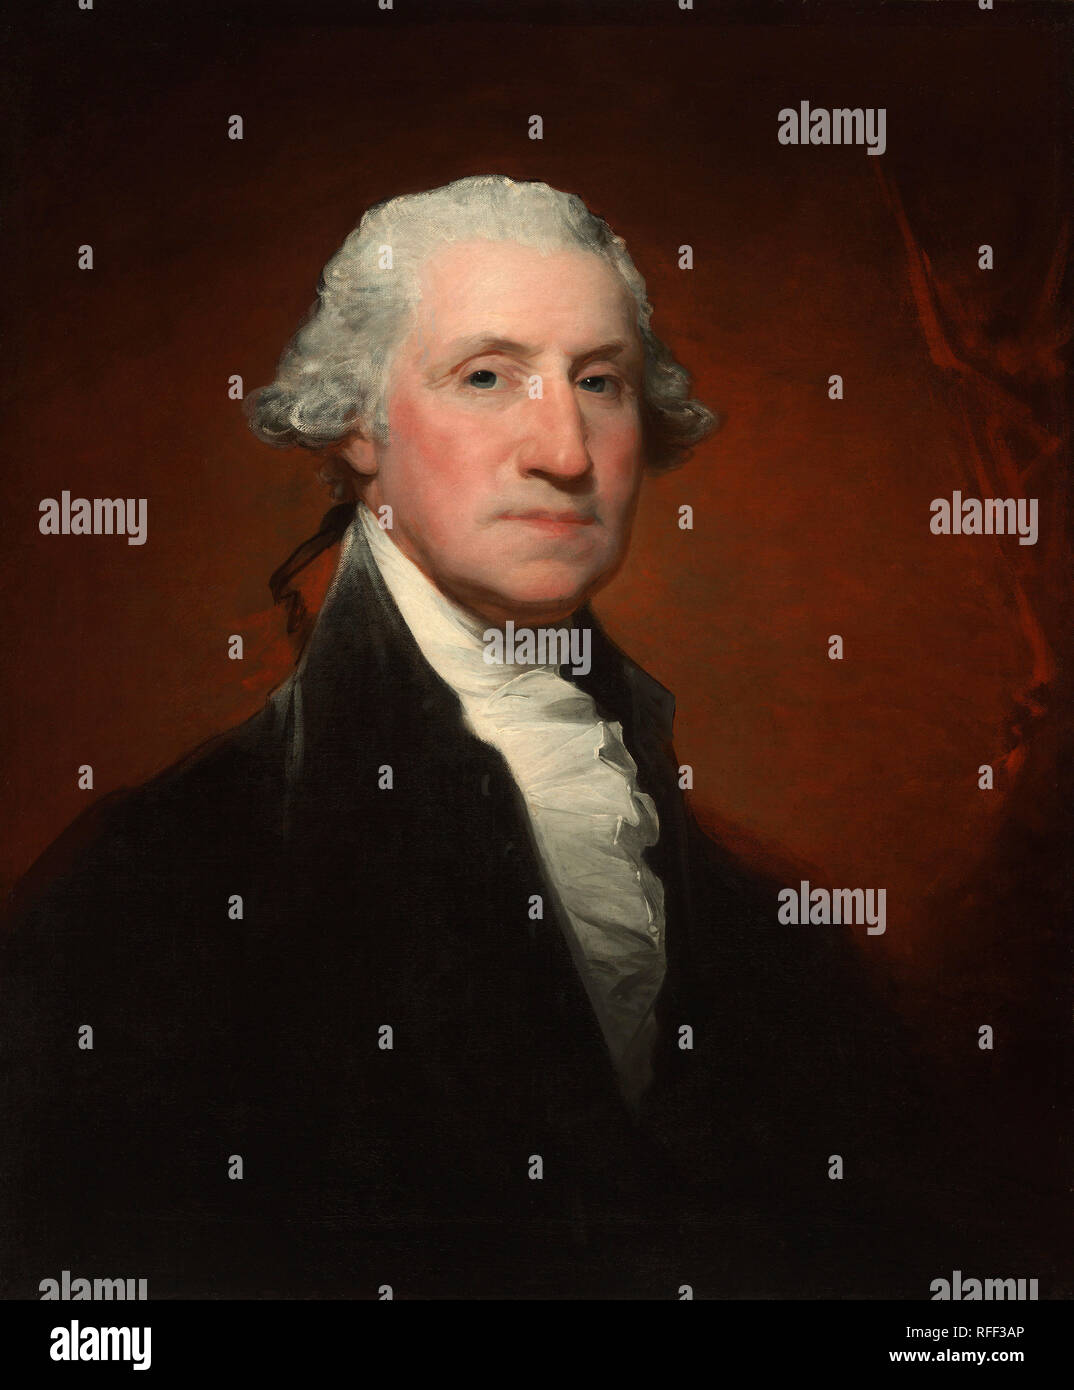 George Washington (Vaughan-Sinclair portrait). Dated: 1795. Dimensions: overall: 73.8 x 61.1 cm (29 1/16 x 24 1/16 in.)  framed: 92.7 x 80 x 9.5 cm (36 1/2 x 31 1/2 x 3 3/4 in.). Medium: oil on canvas. Museum: National Gallery of Art, Washington DC. Author: GILBERT STUART. Stock Photo